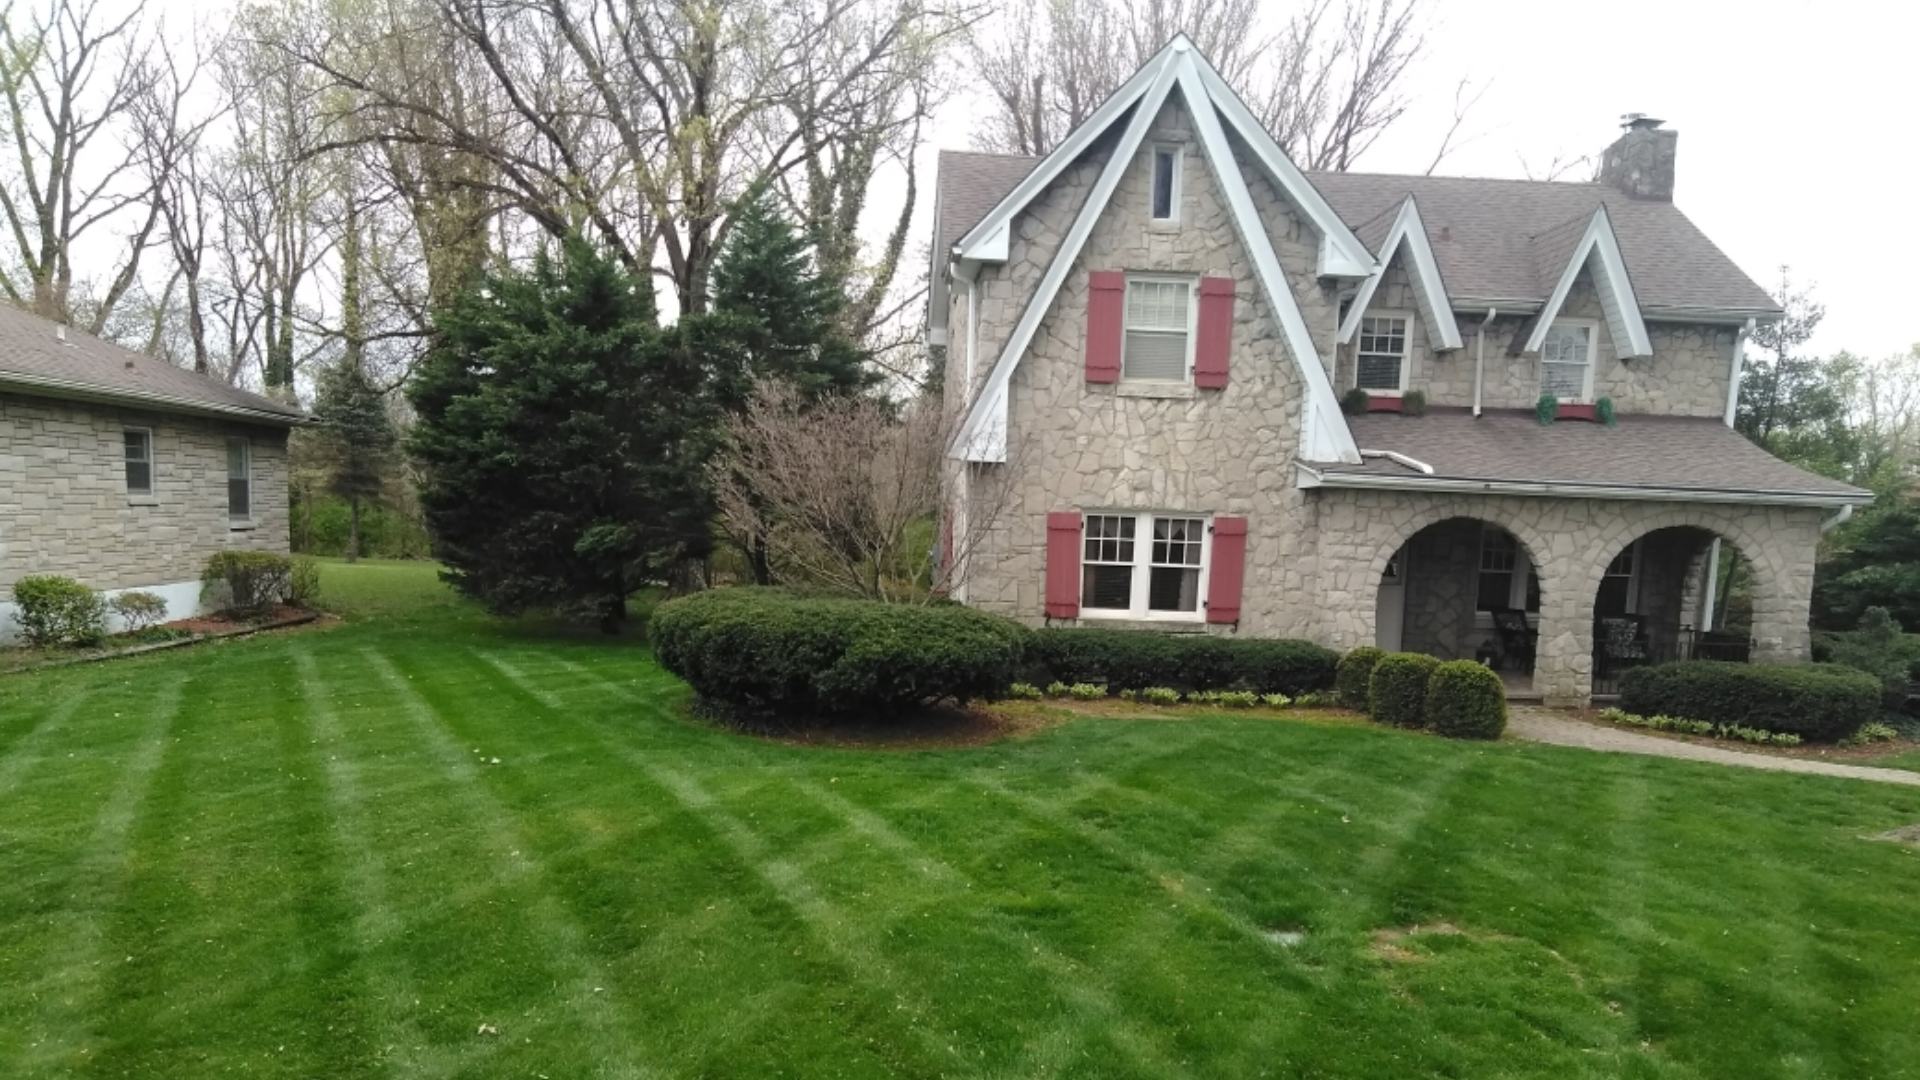 Freshly mowed lawn with patterns in Louisville, KY.